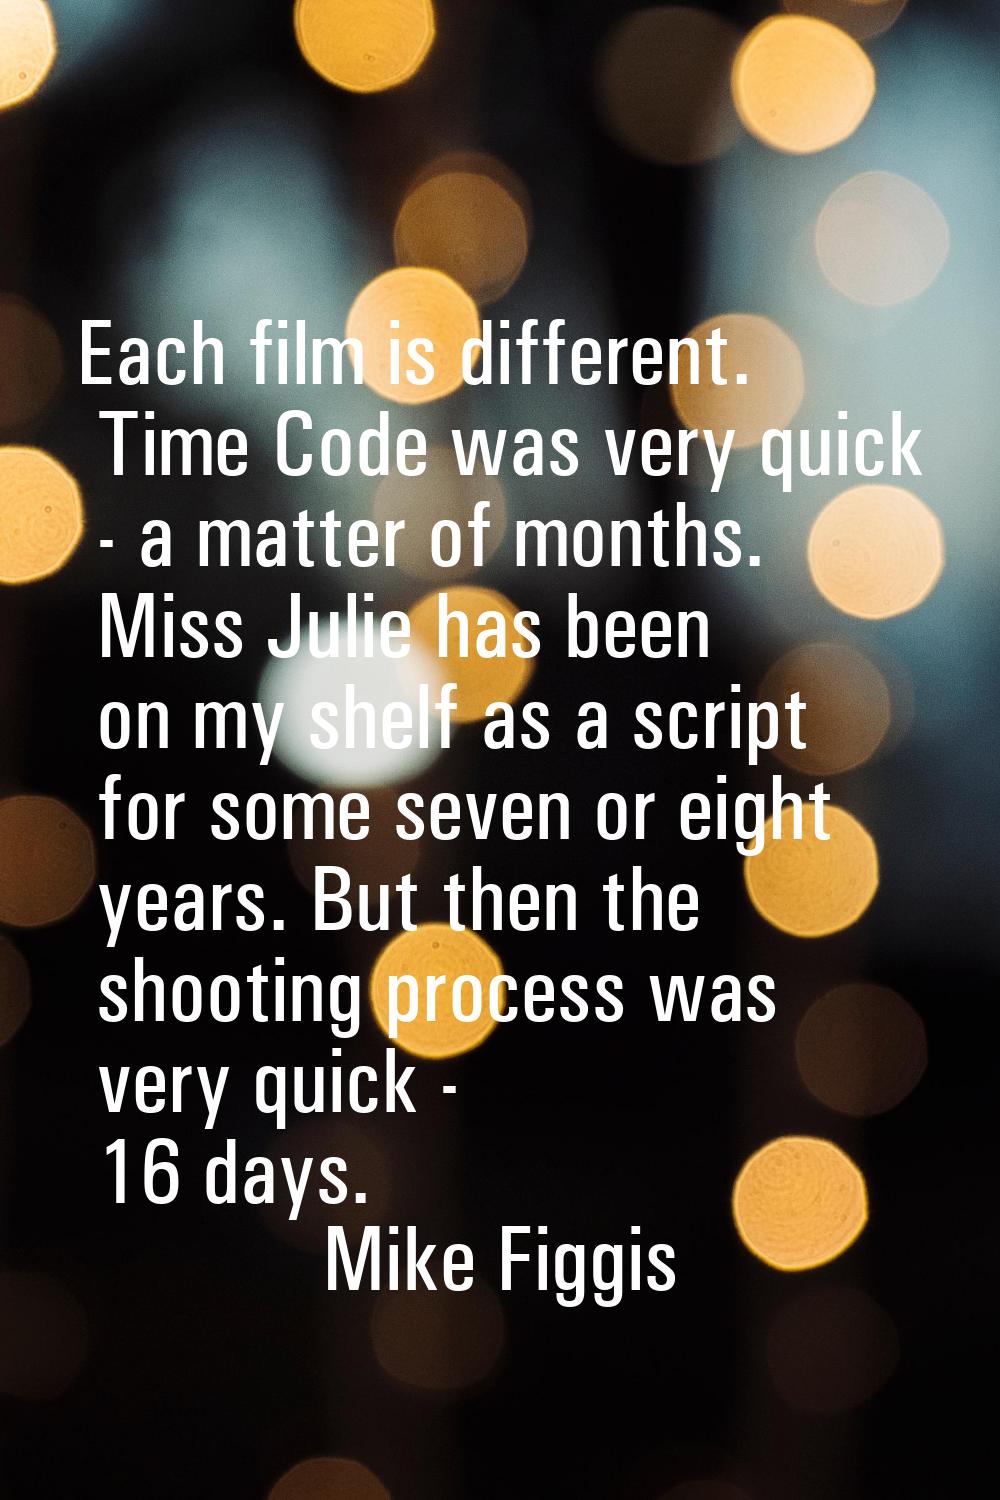 Each film is different. Time Code was very quick - a matter of months. Miss Julie has been on my sh